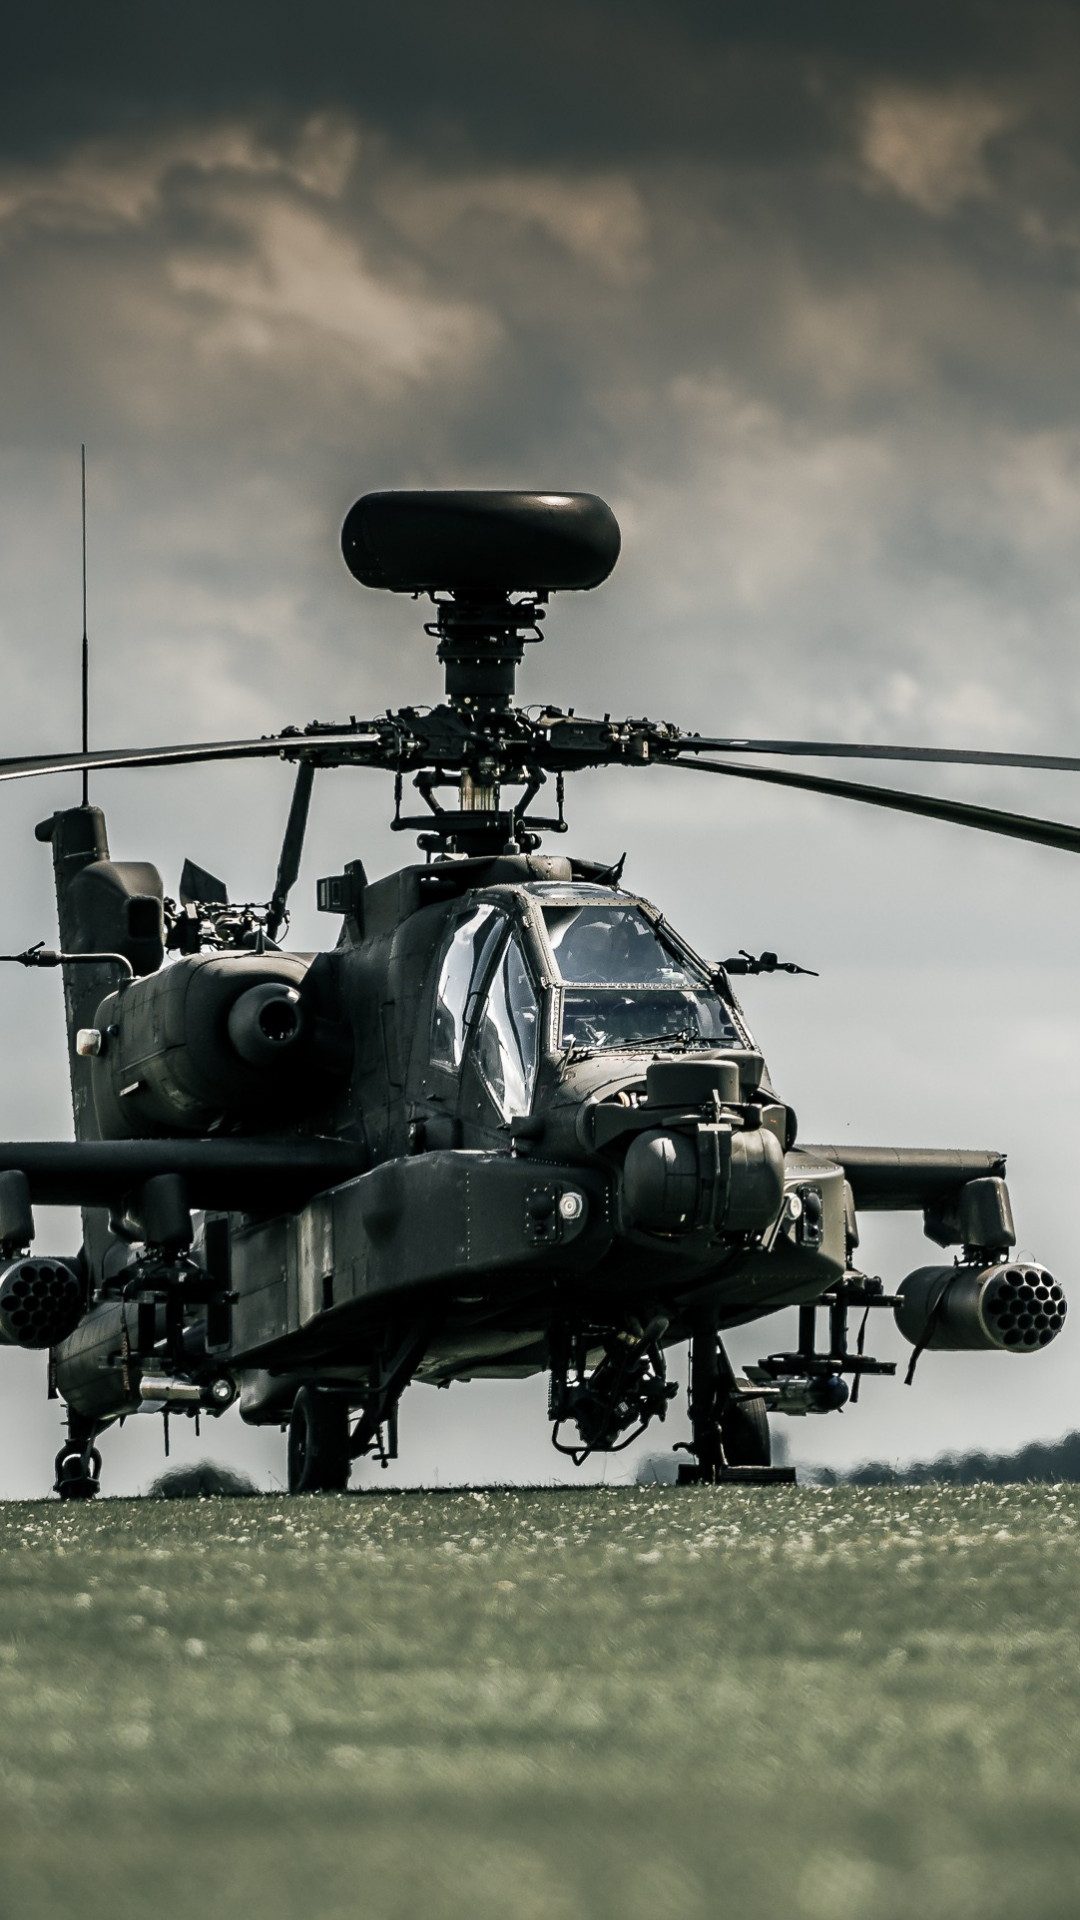 Wallpaper Ah 64d Apache Attack Helicopter Royal Air Force Dark Sky